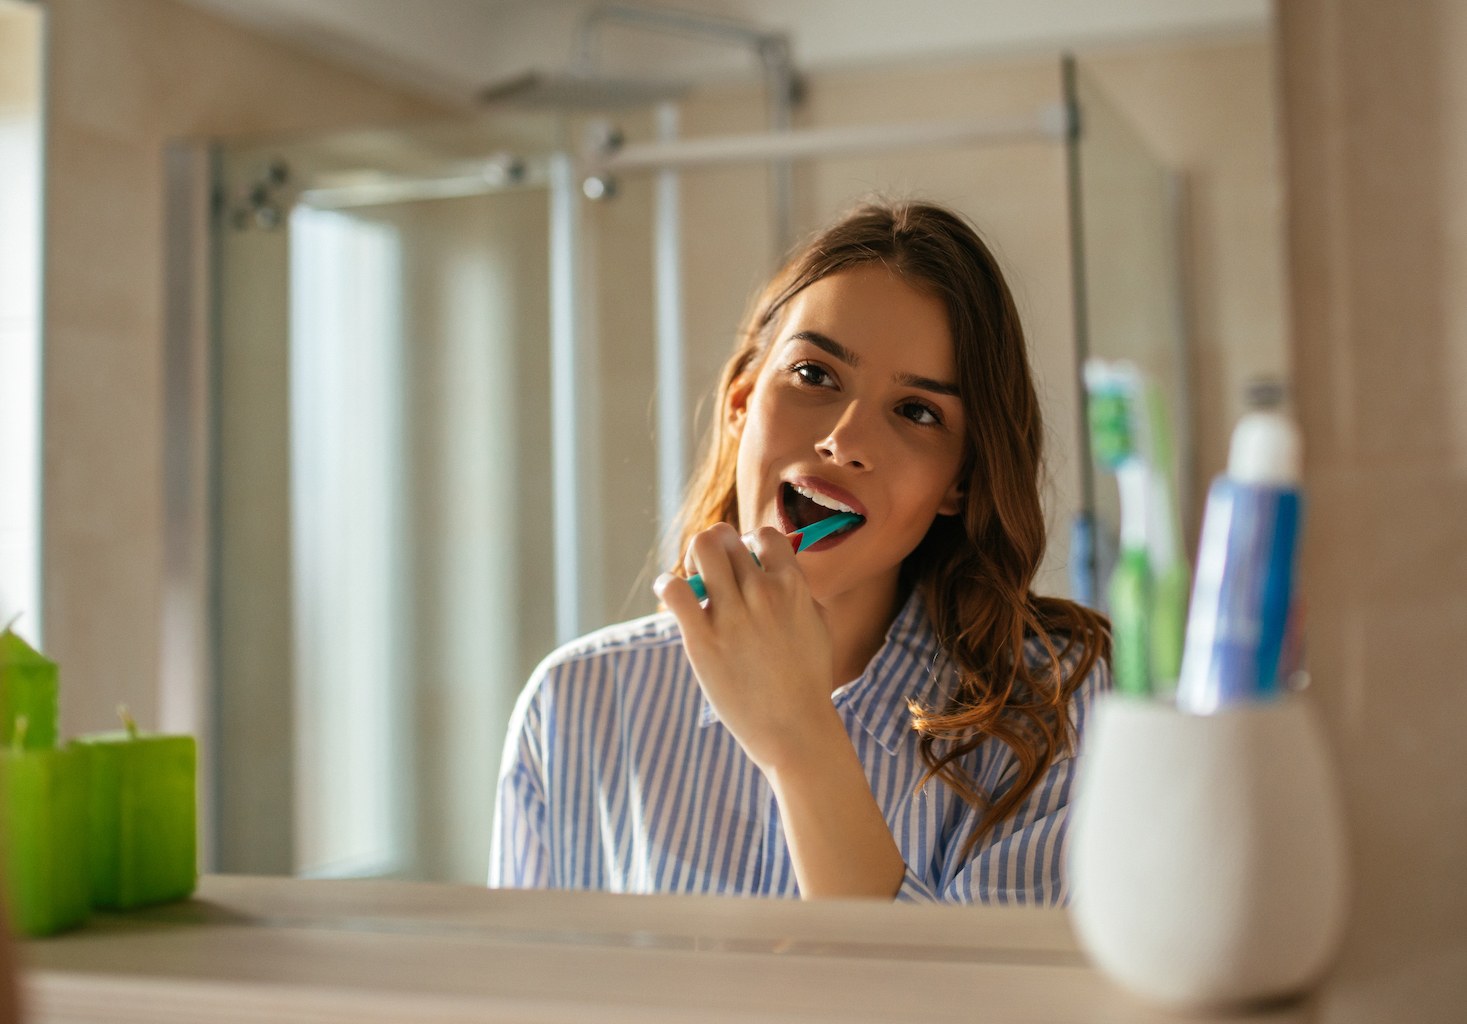 Why Should You Change Your Toothbrush Every 3 Months